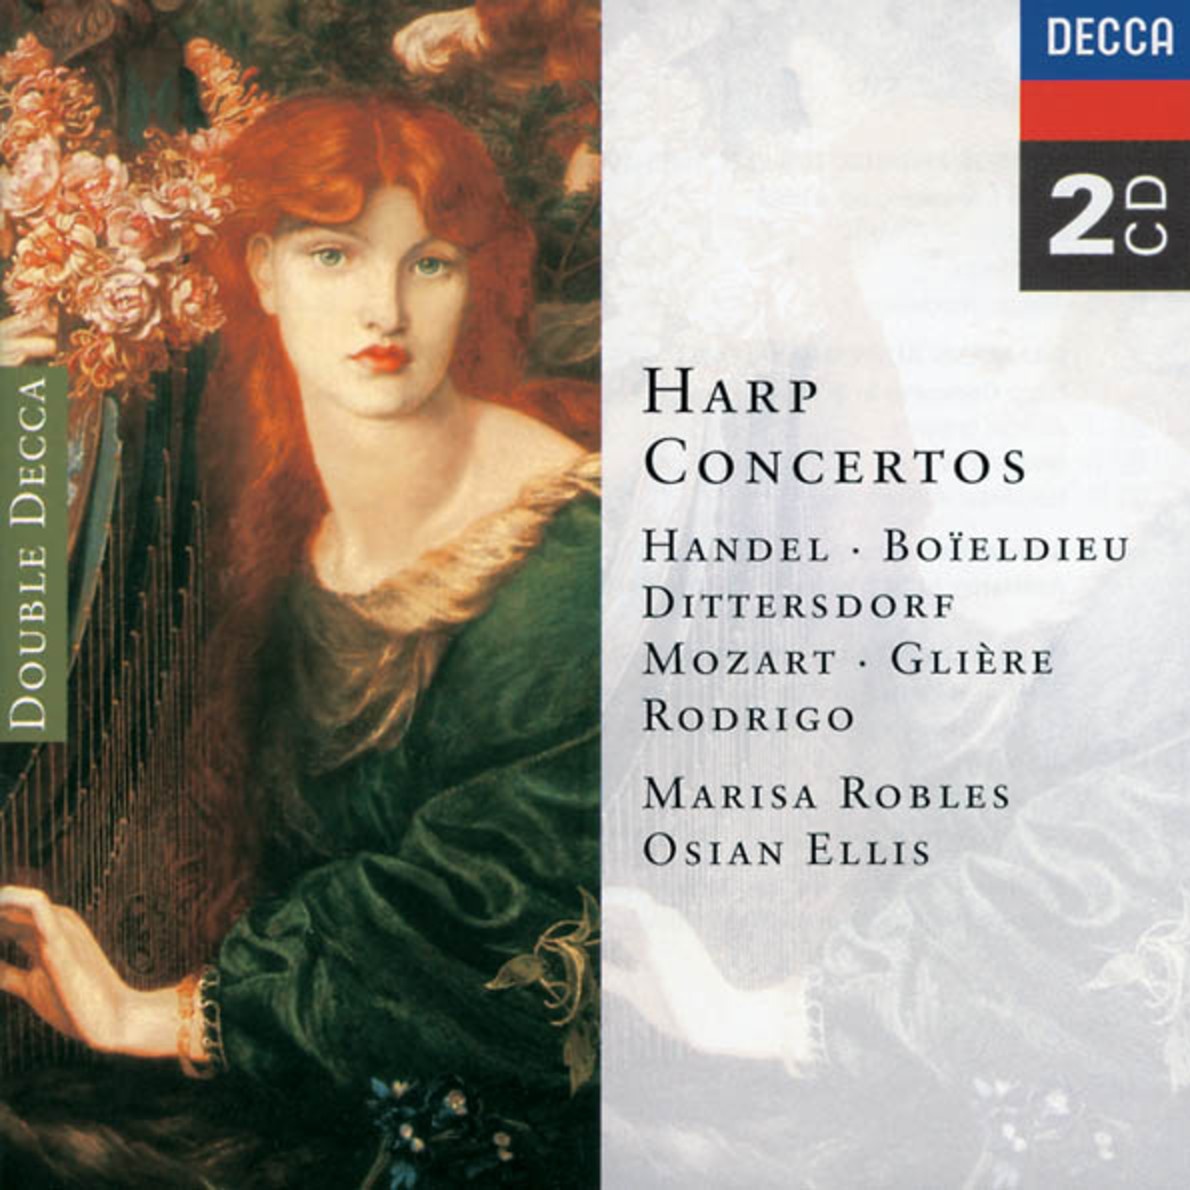 Harp Concerto in B flat, Op.4, No.6, HWV 294:2. Larghetto